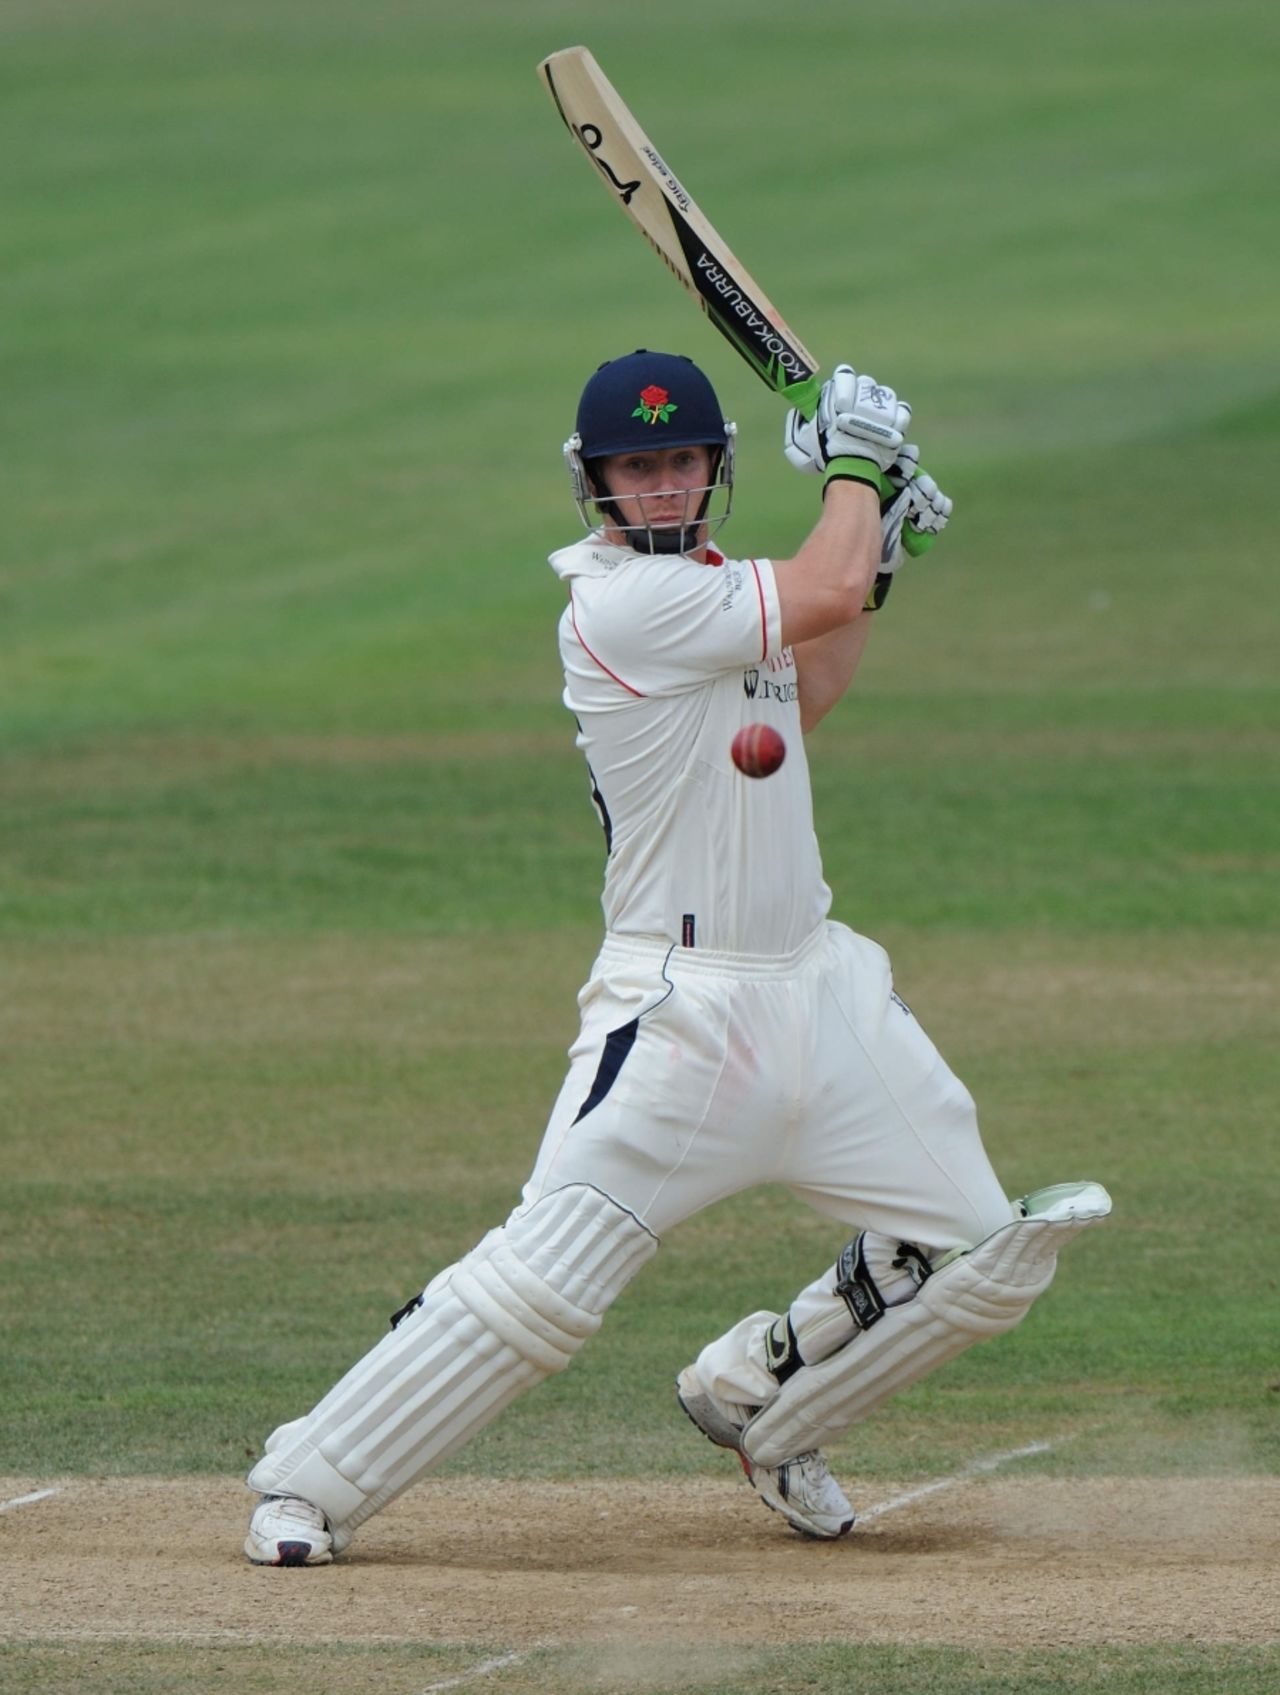 Steven Croft cracked four boundaries before he was dismissed by Danny Briggs in the second innings, Hampshire v Lancashire, County Championship Division One, Rose Bowl, August 1 2010